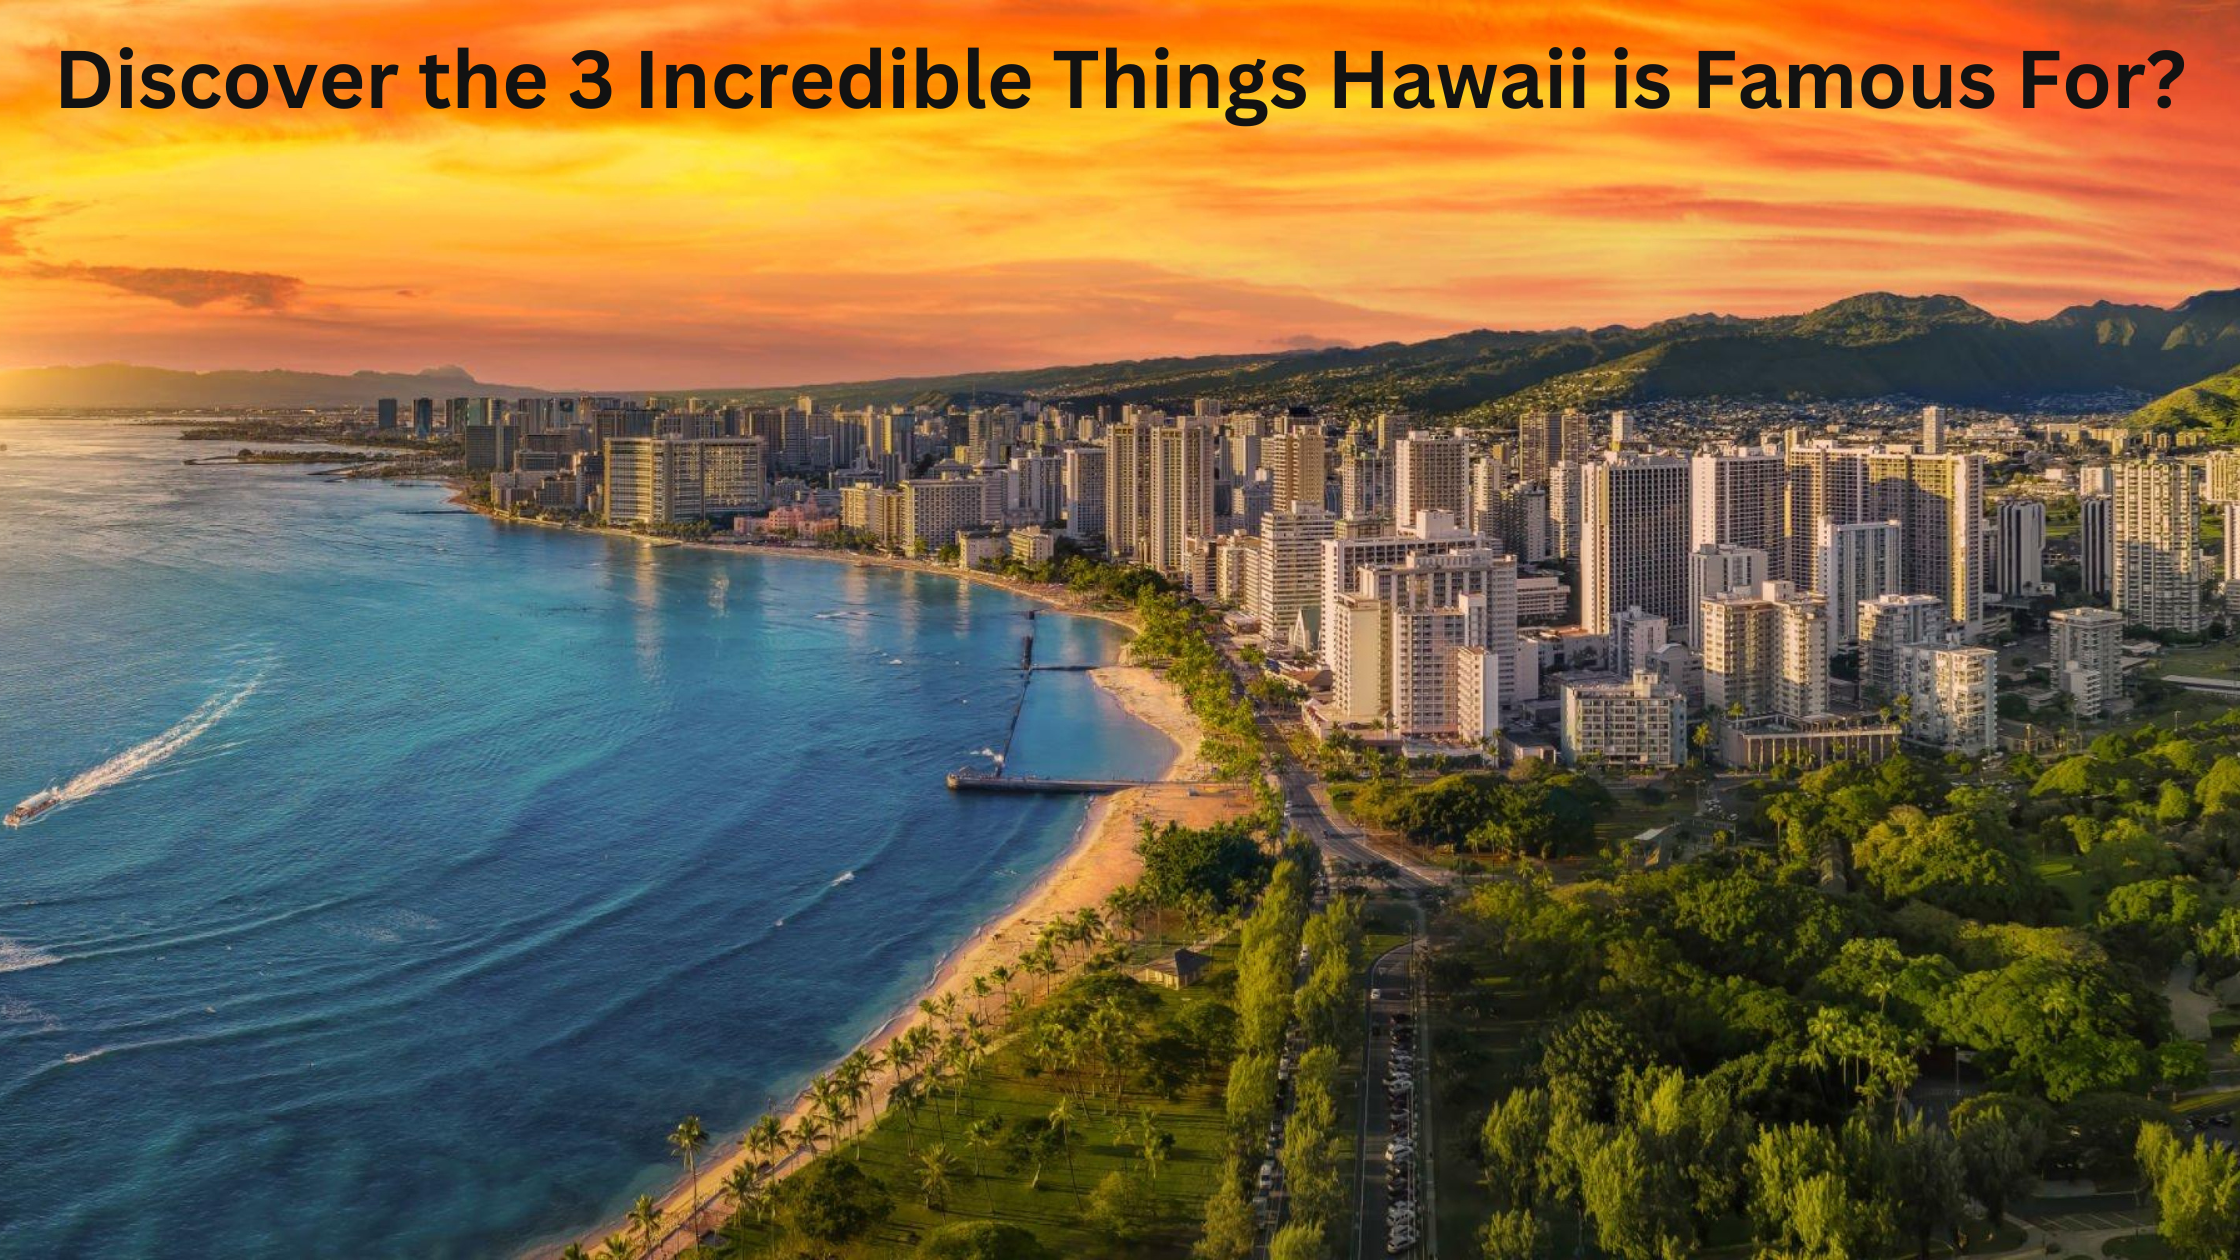 Discover the 3 Incredible Things Hawaii is Famous For